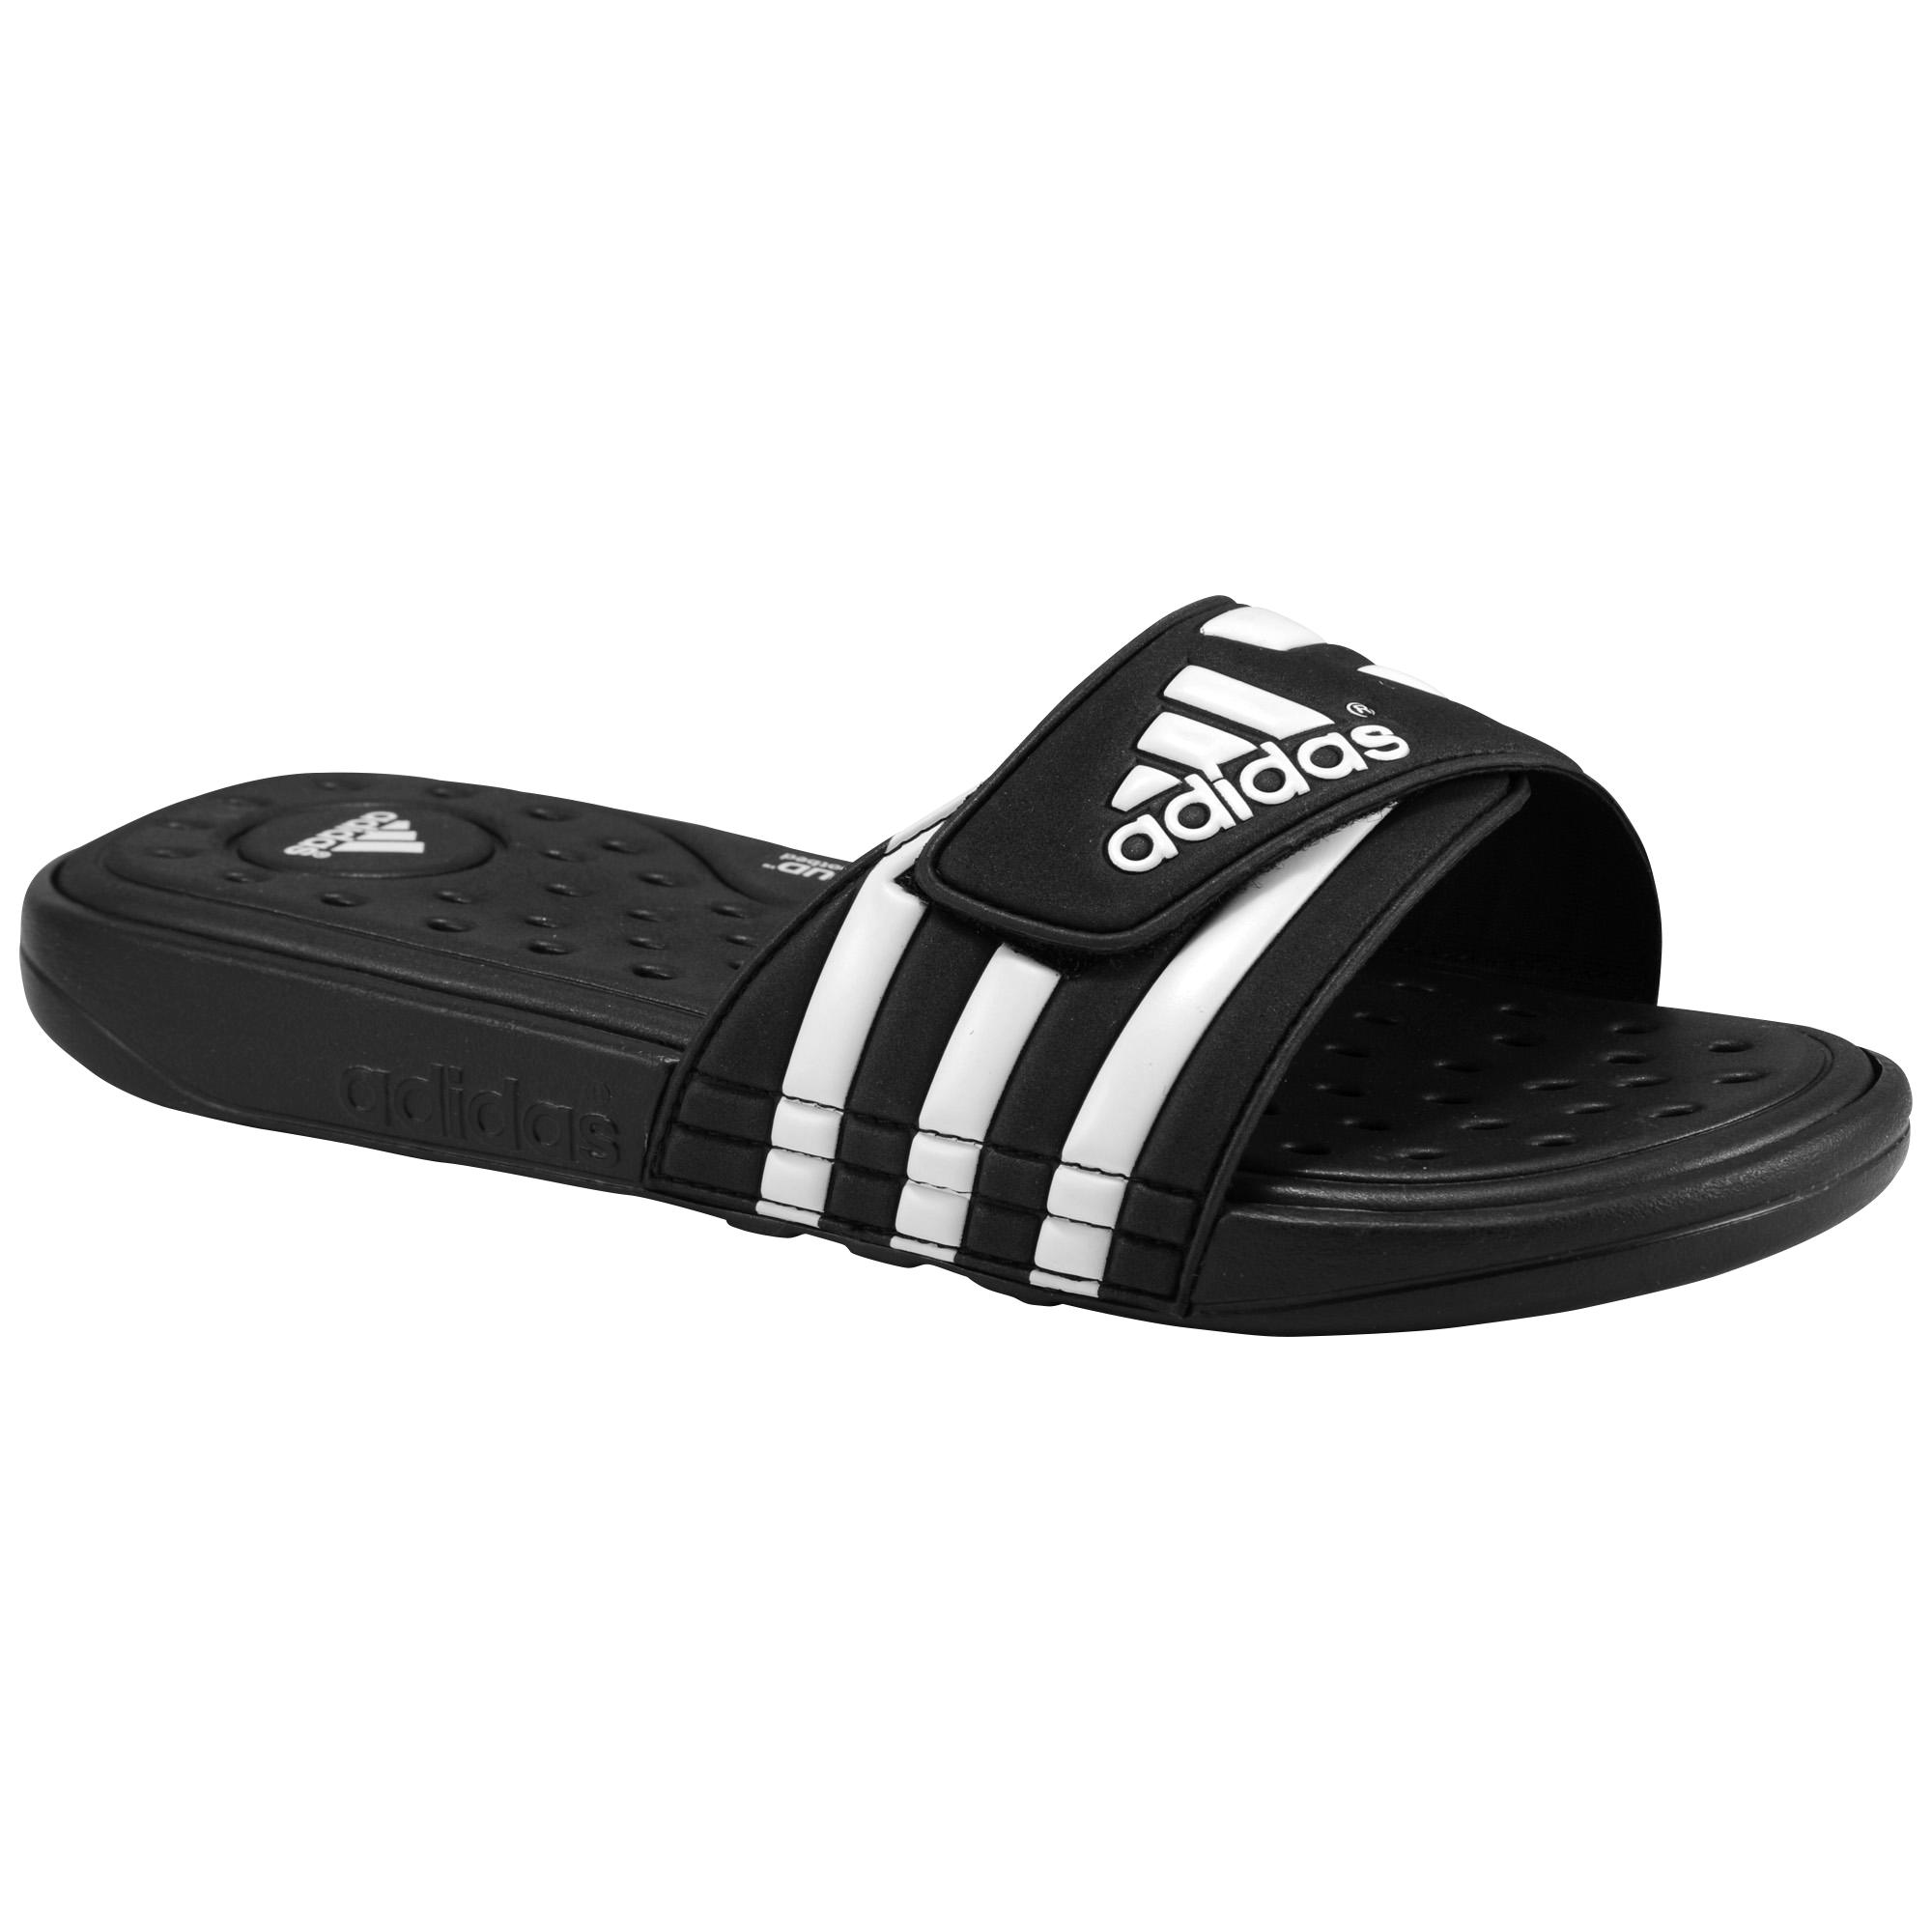 adidas Synthetic Adissage Supercloud Slide in Black/White (Black) for Men -  Lyst